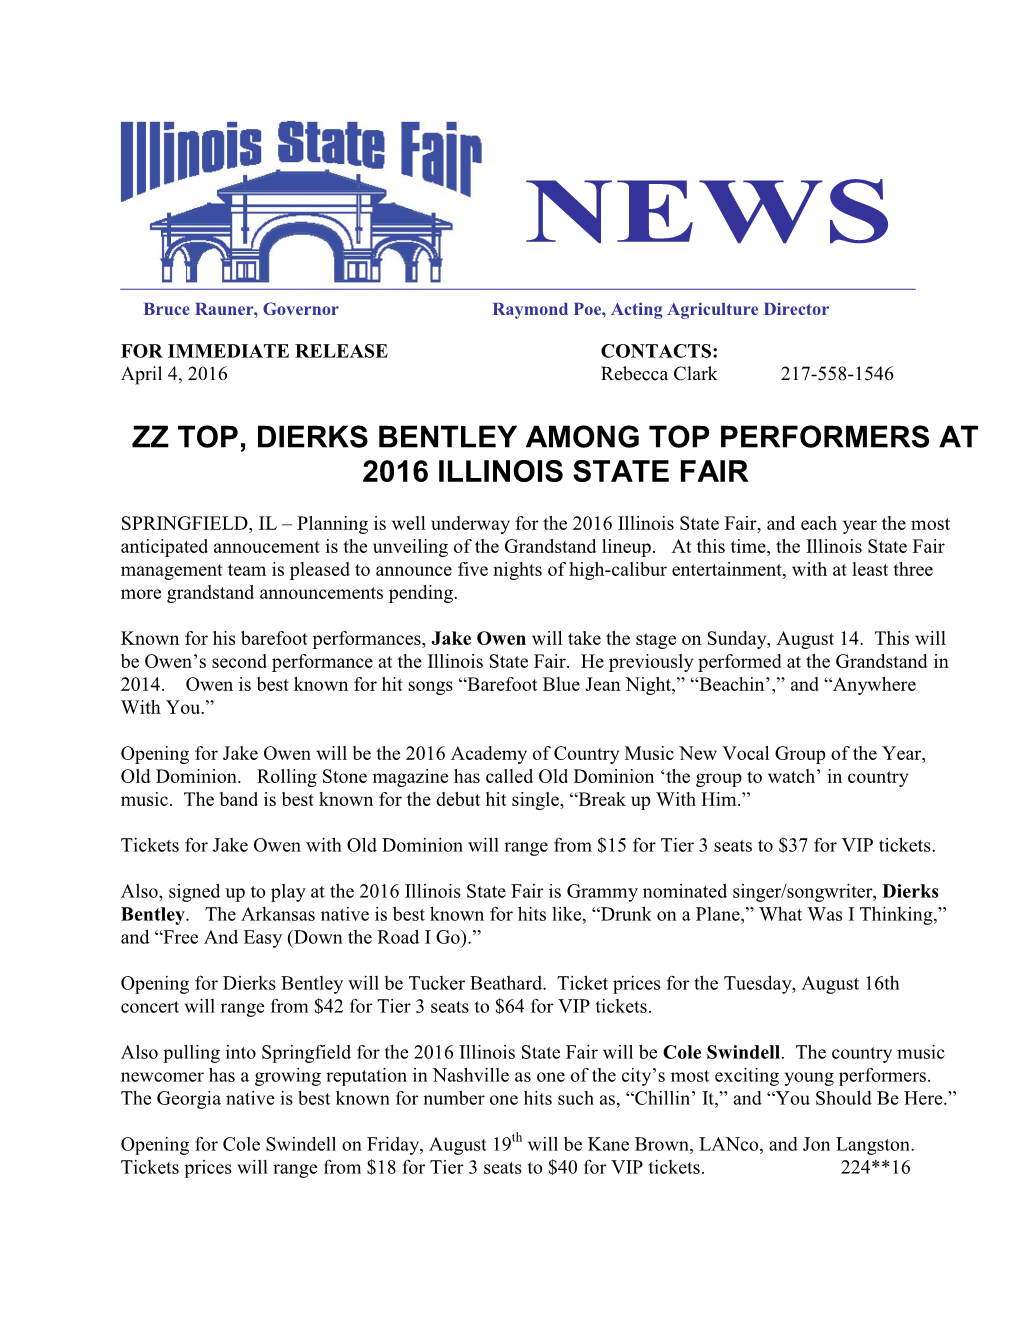 Zz Top, Dierks Bentley Among Top Performers at 2016 Illinois State Fair